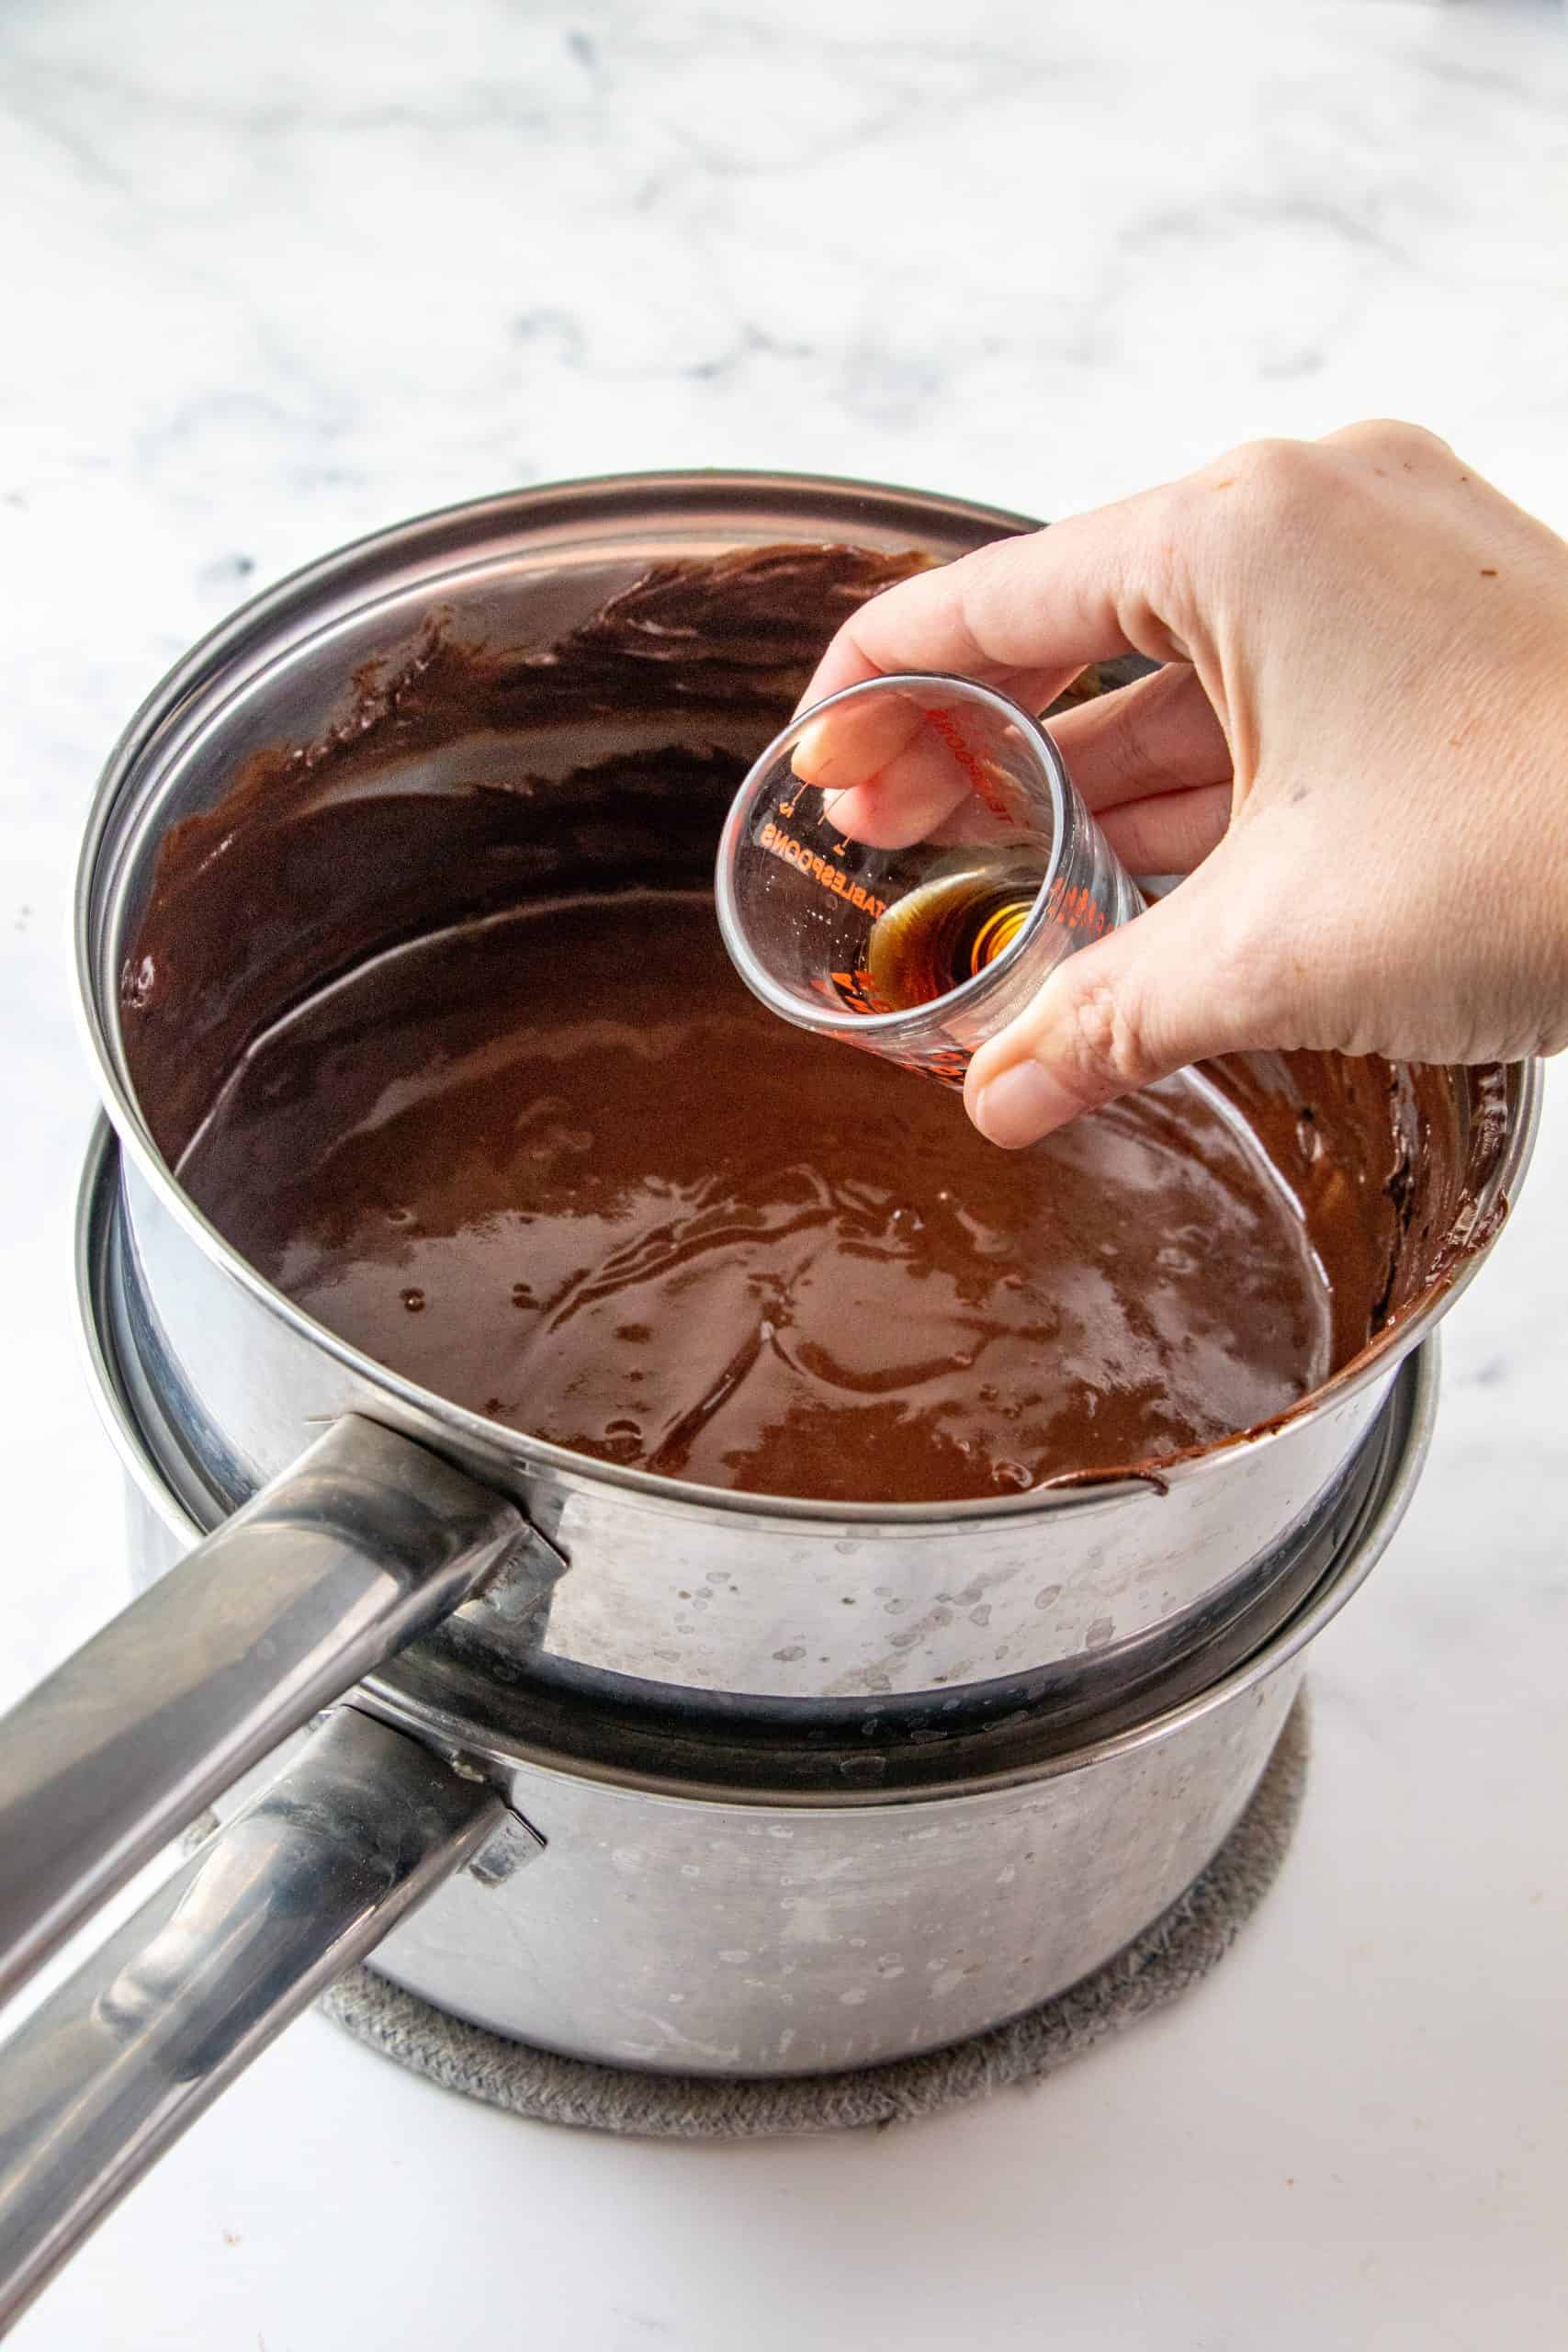 Vanilla being poured into melted chocolate in double boiler.